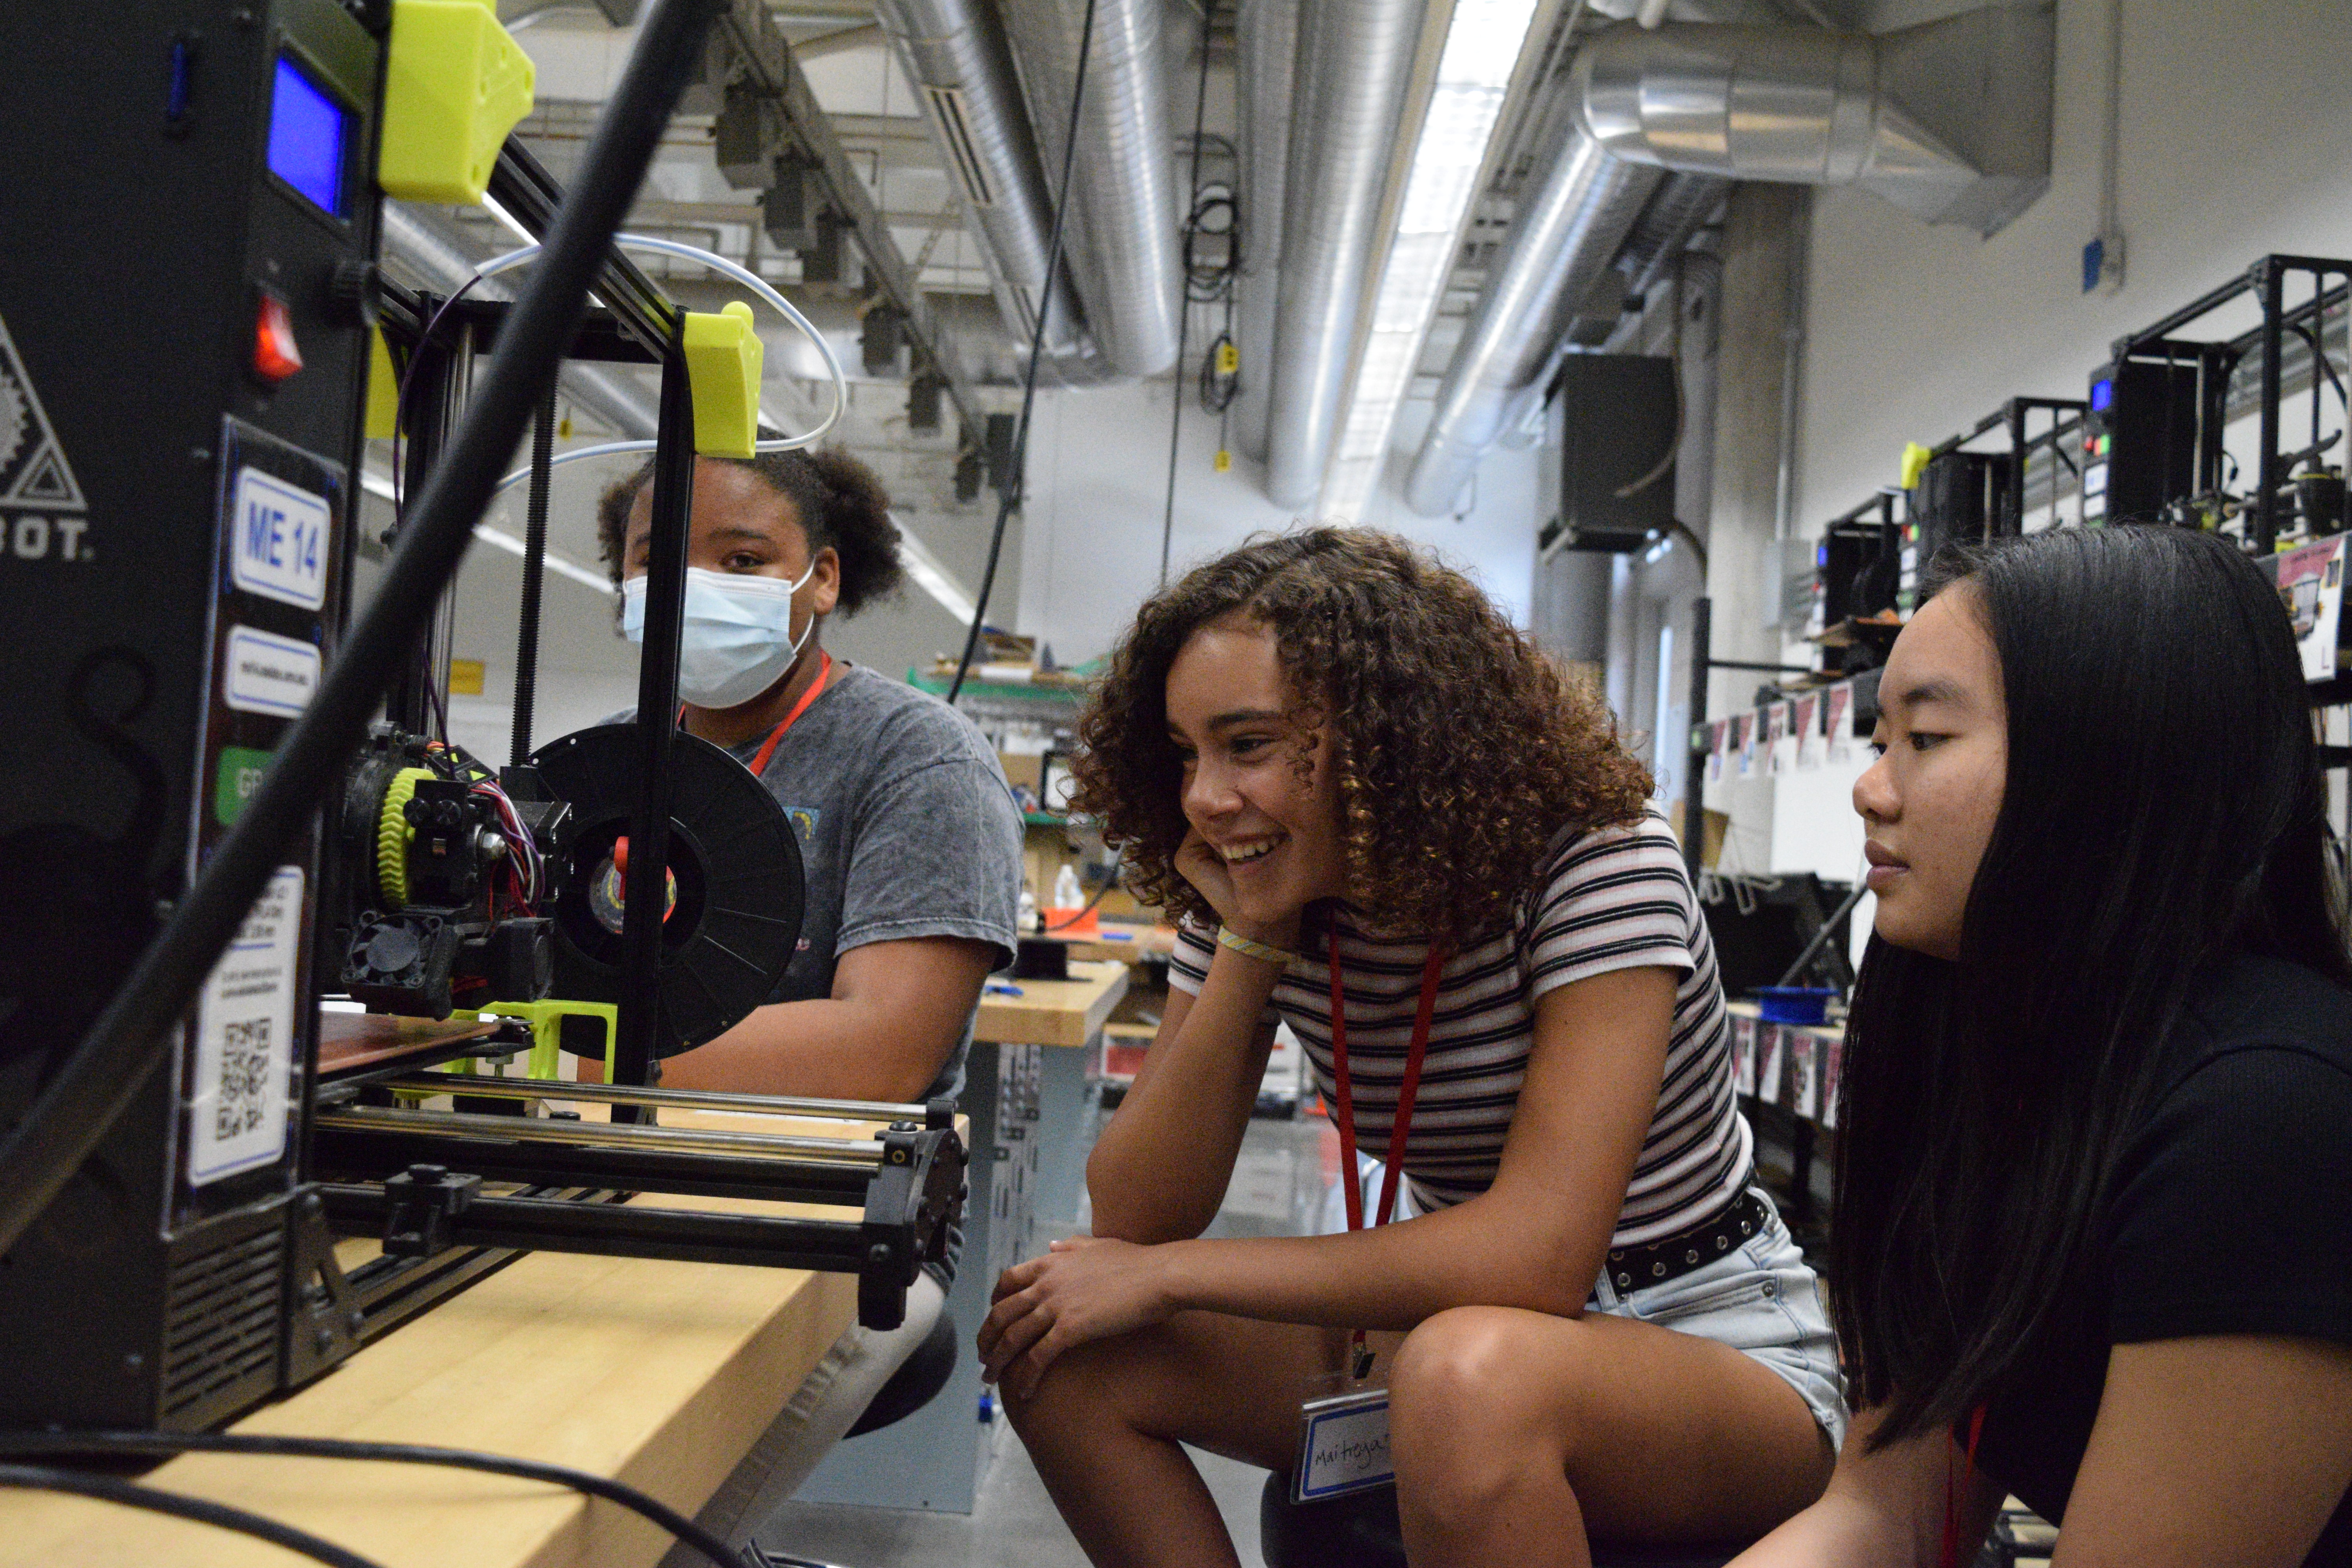 Three young women watching a 3D printer in action.